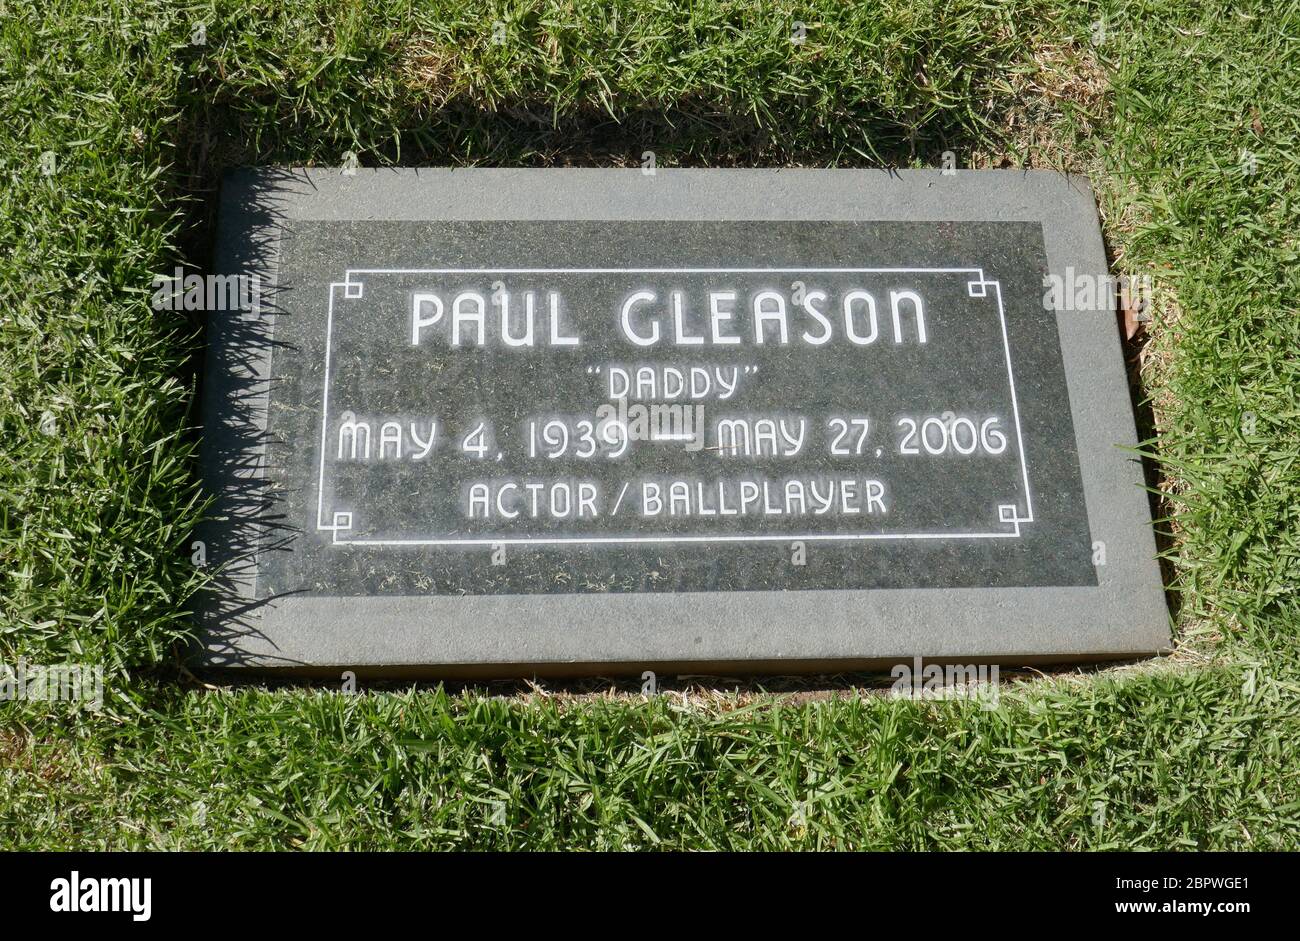 Los Angeles, California, USA 19th May 2020 A general view of atmosphere of Paul Gleason's grave at Pierce Brothers Westwood Village Memorial Park on May 19, 2020 in Los Angeles, California, USA. Photo by Barry King/Alamy Stock Photo Stock Photo